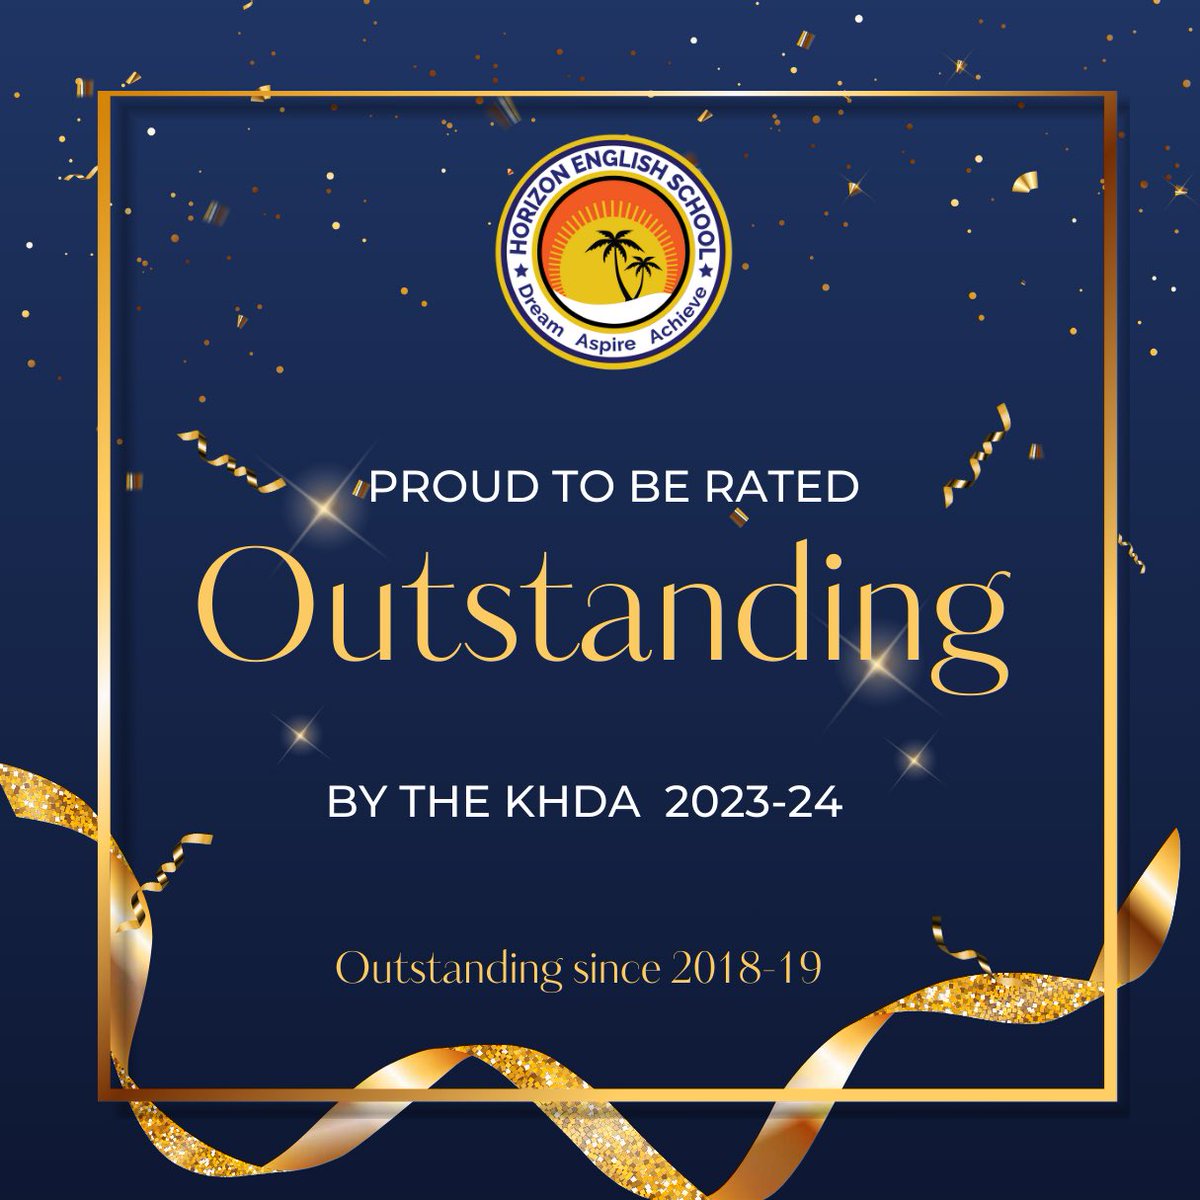 Horizon is delighted to officially announce that we have once again been awarded the rating of ‘Outstanding’ from the KHDA’s annual inspection for the 6th year in a row. 🎉 @KHDA #Outstanding #BestBritishSchoolsDubai #DubaiSchools #HappyHorizon #HorizonWay #CognitaWay